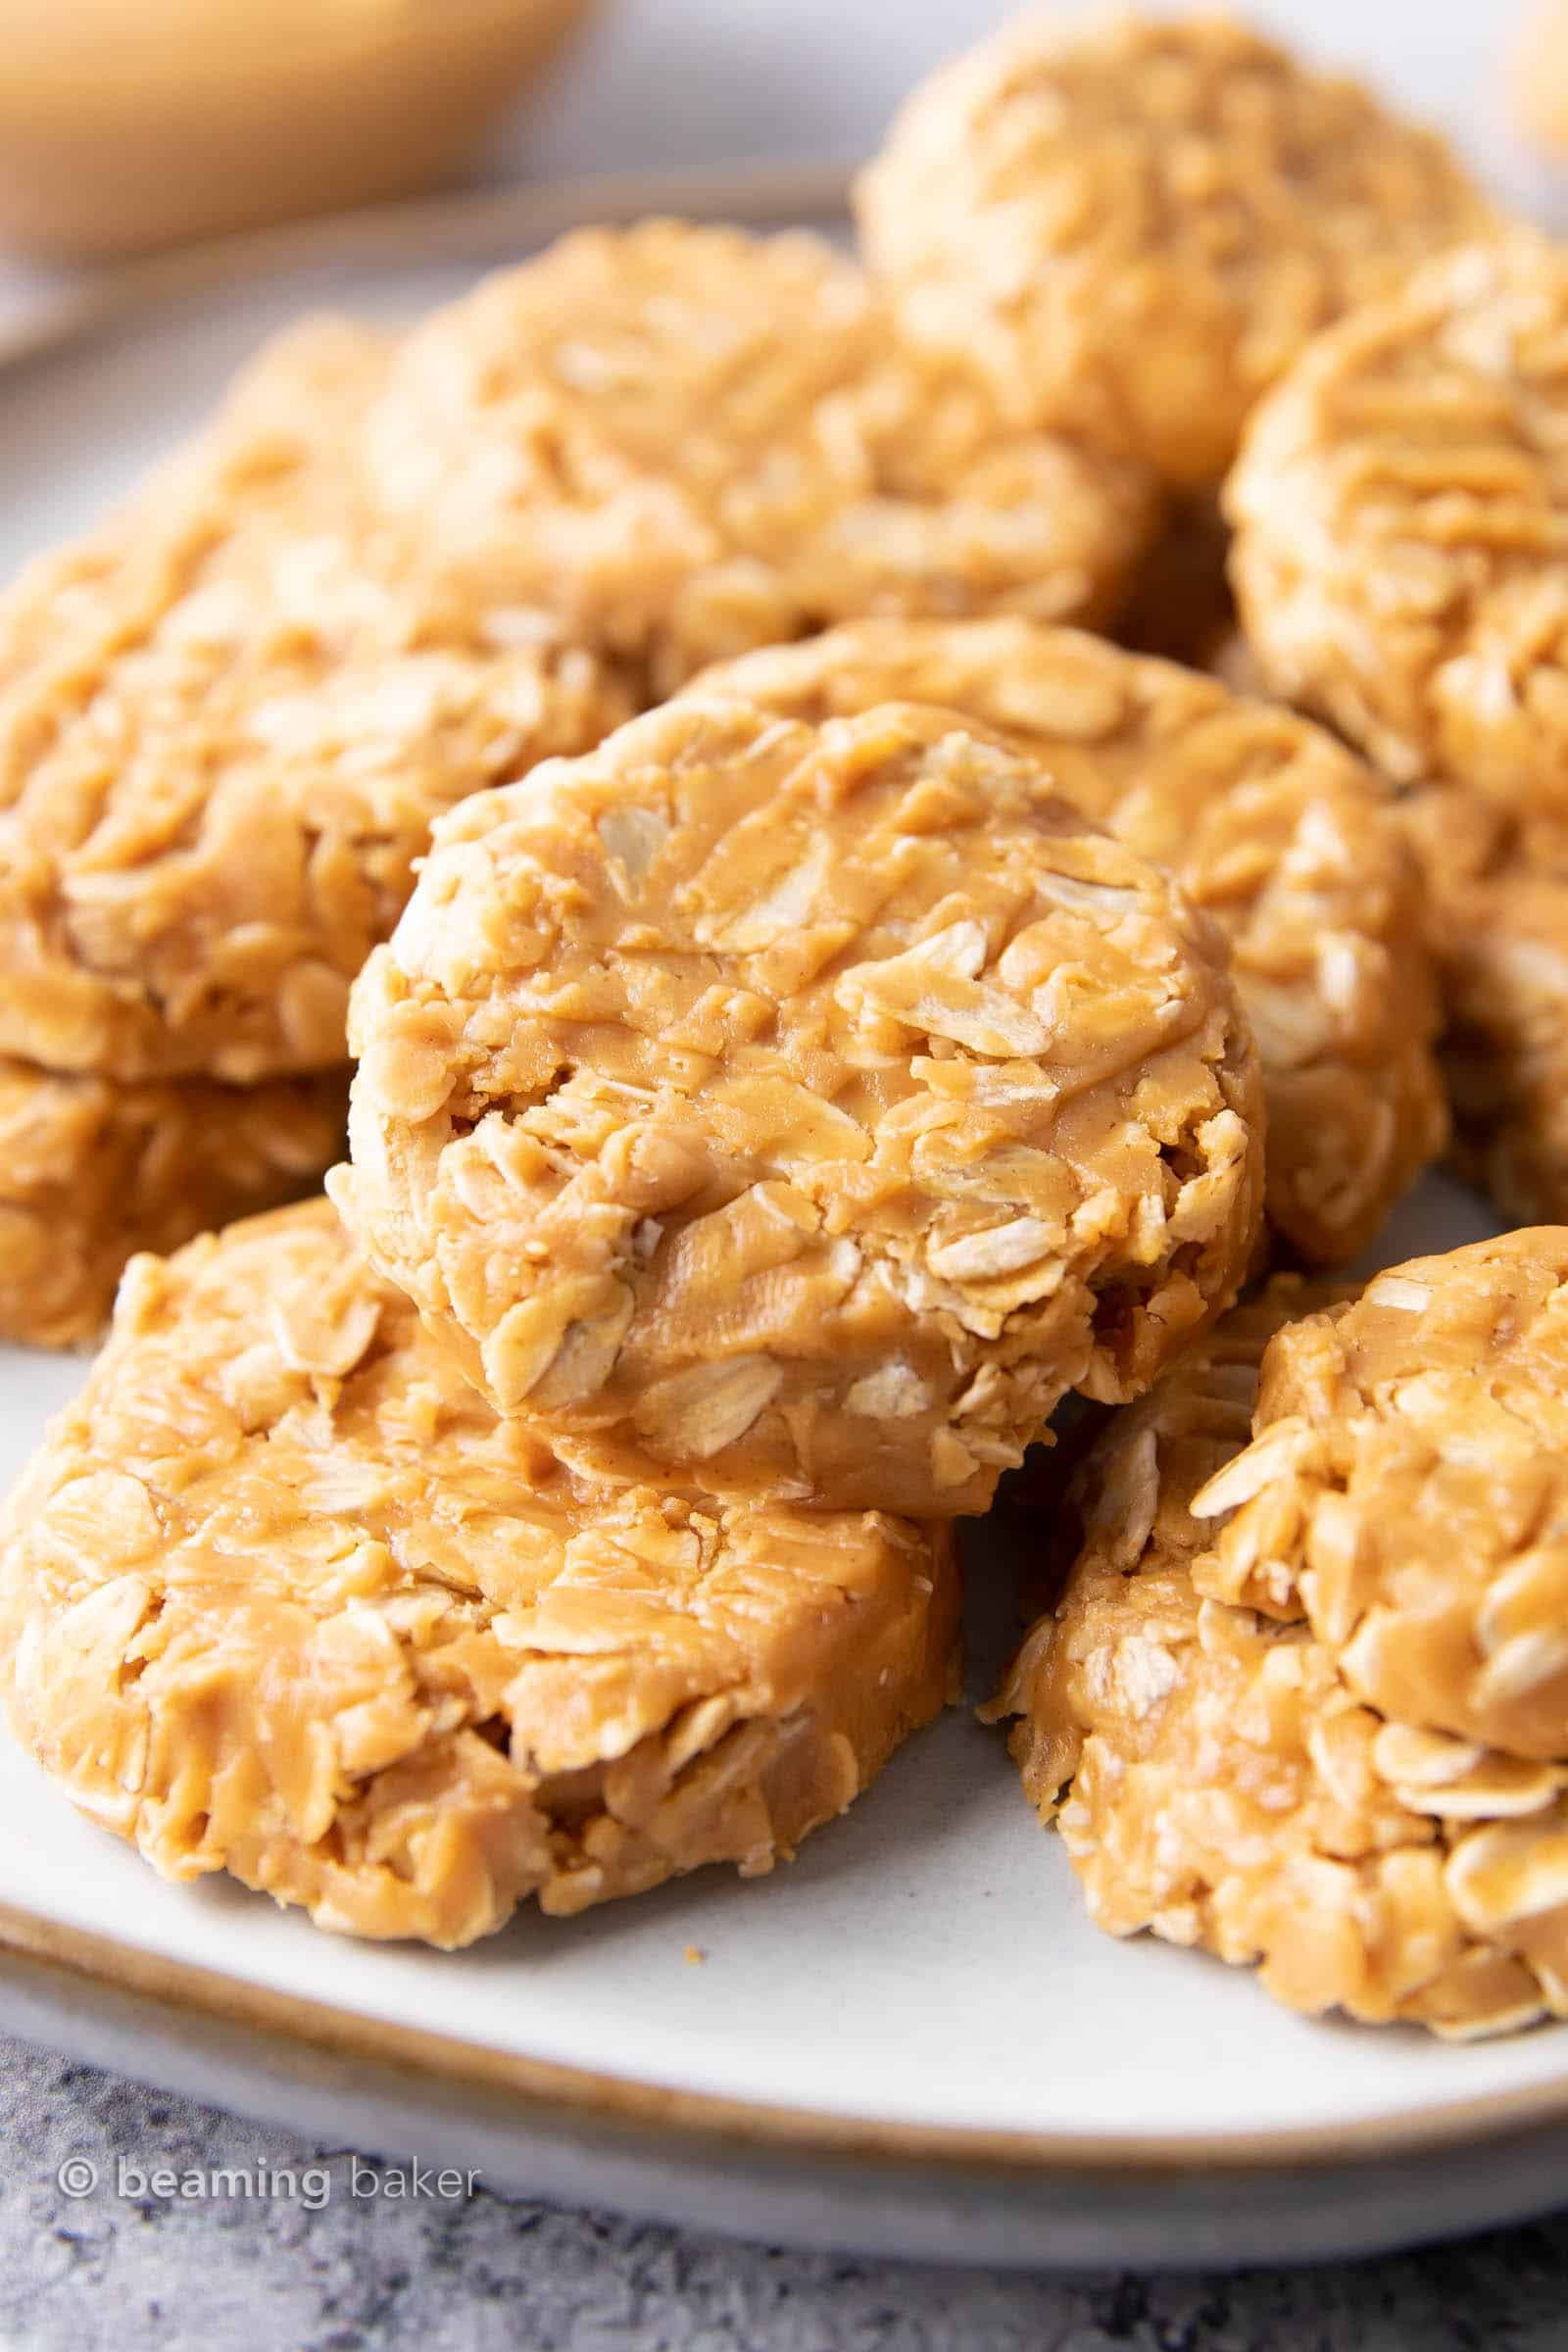 Easy Peanut Butter No Bake Cookies: this 3 ingredient peanut butter no bake cookies recipe is so easy to make! Sweet, chewy and satisfying no bake peanut butter oatmeal cookies. #NoBake #Cookies #PeanutButter #Oatmeal | Recipe at BeamingBaker.com